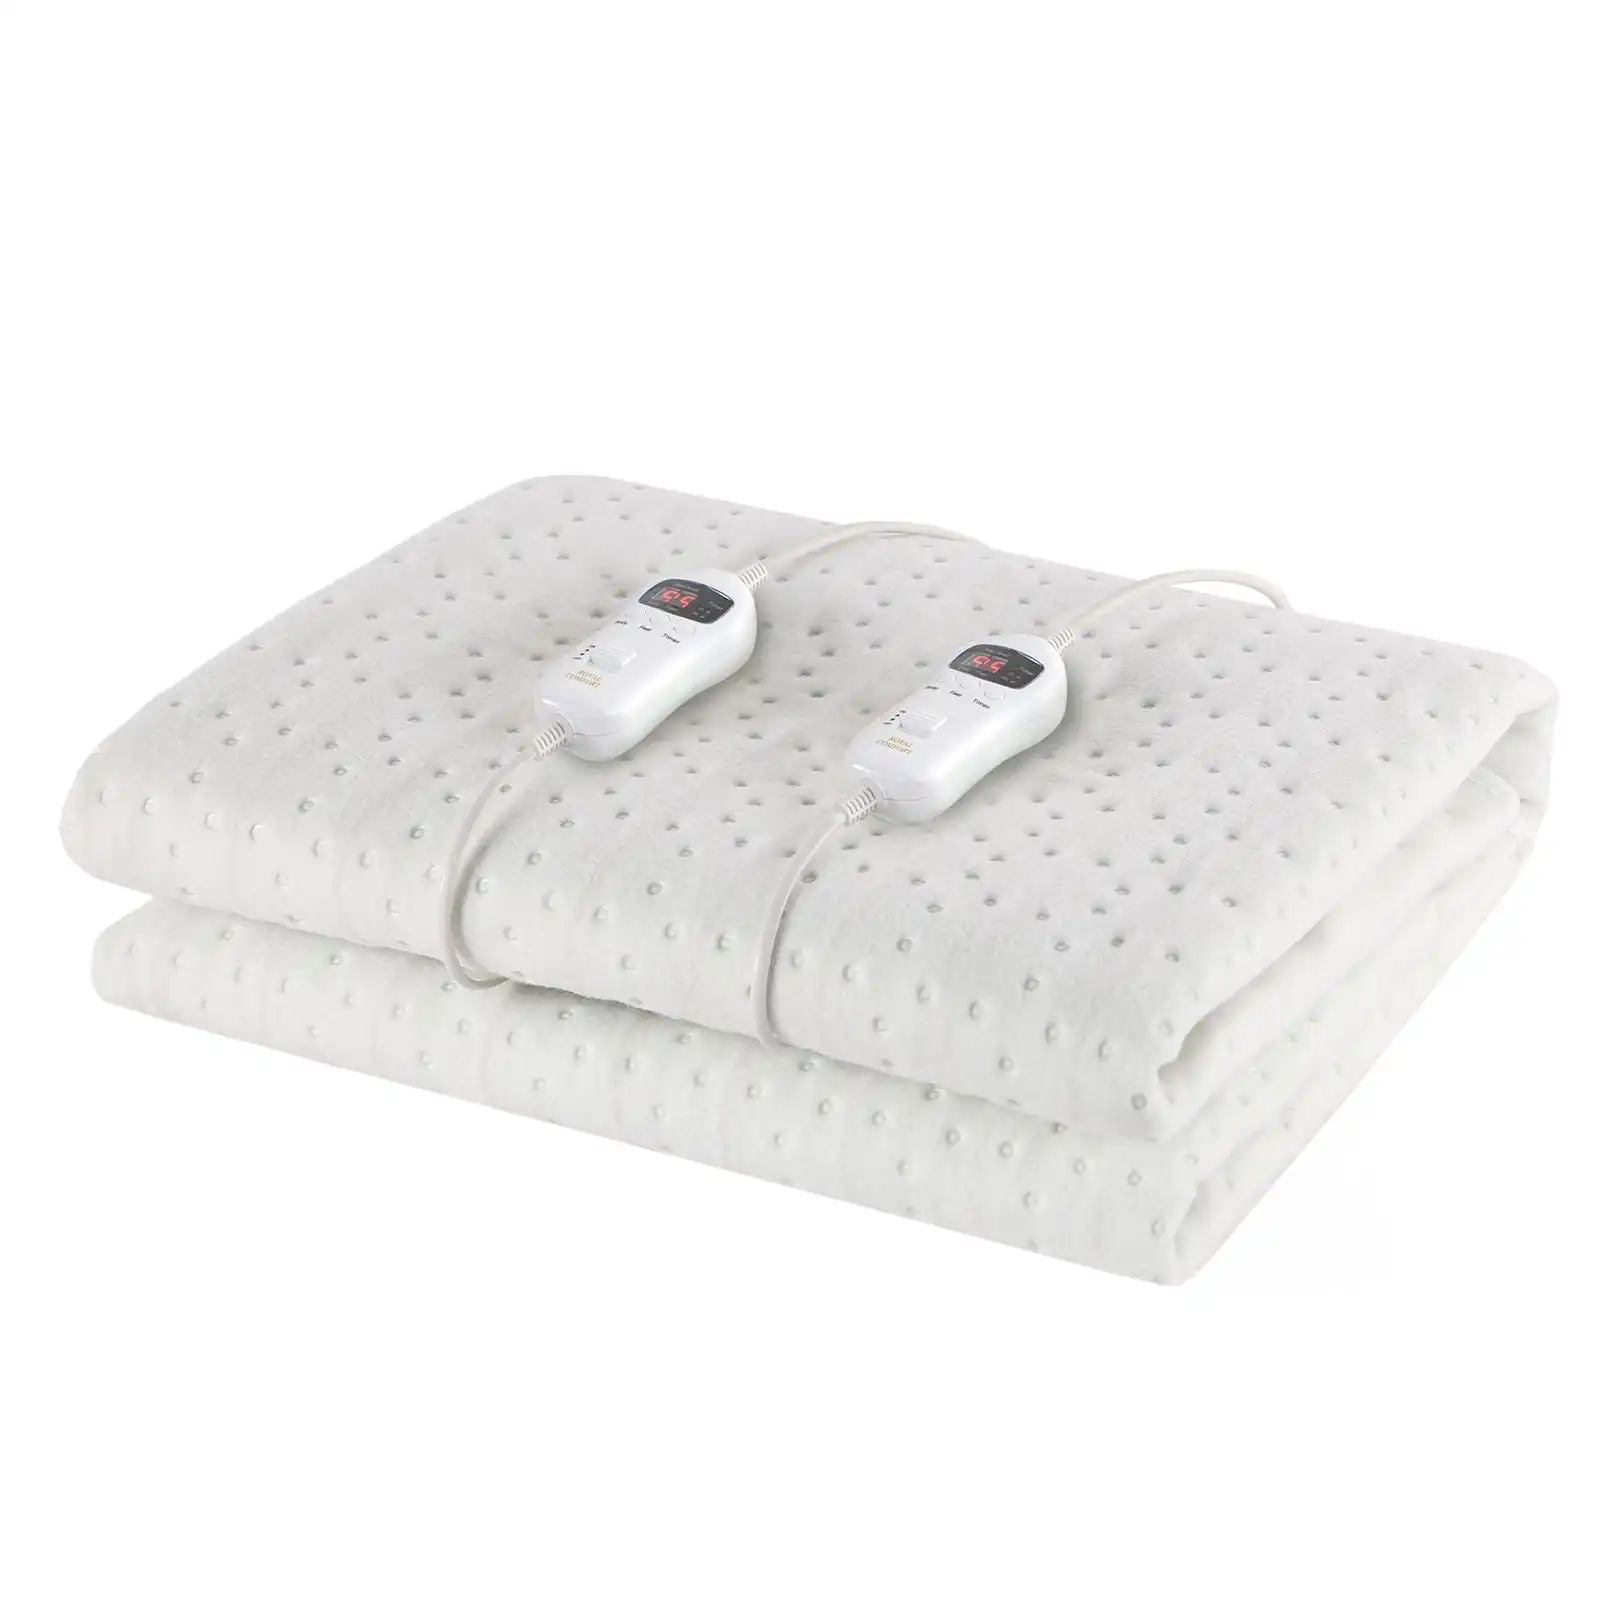 Royal Comfort Thermolux Elite Electric Blanket Multi Zone Fully Fitted White